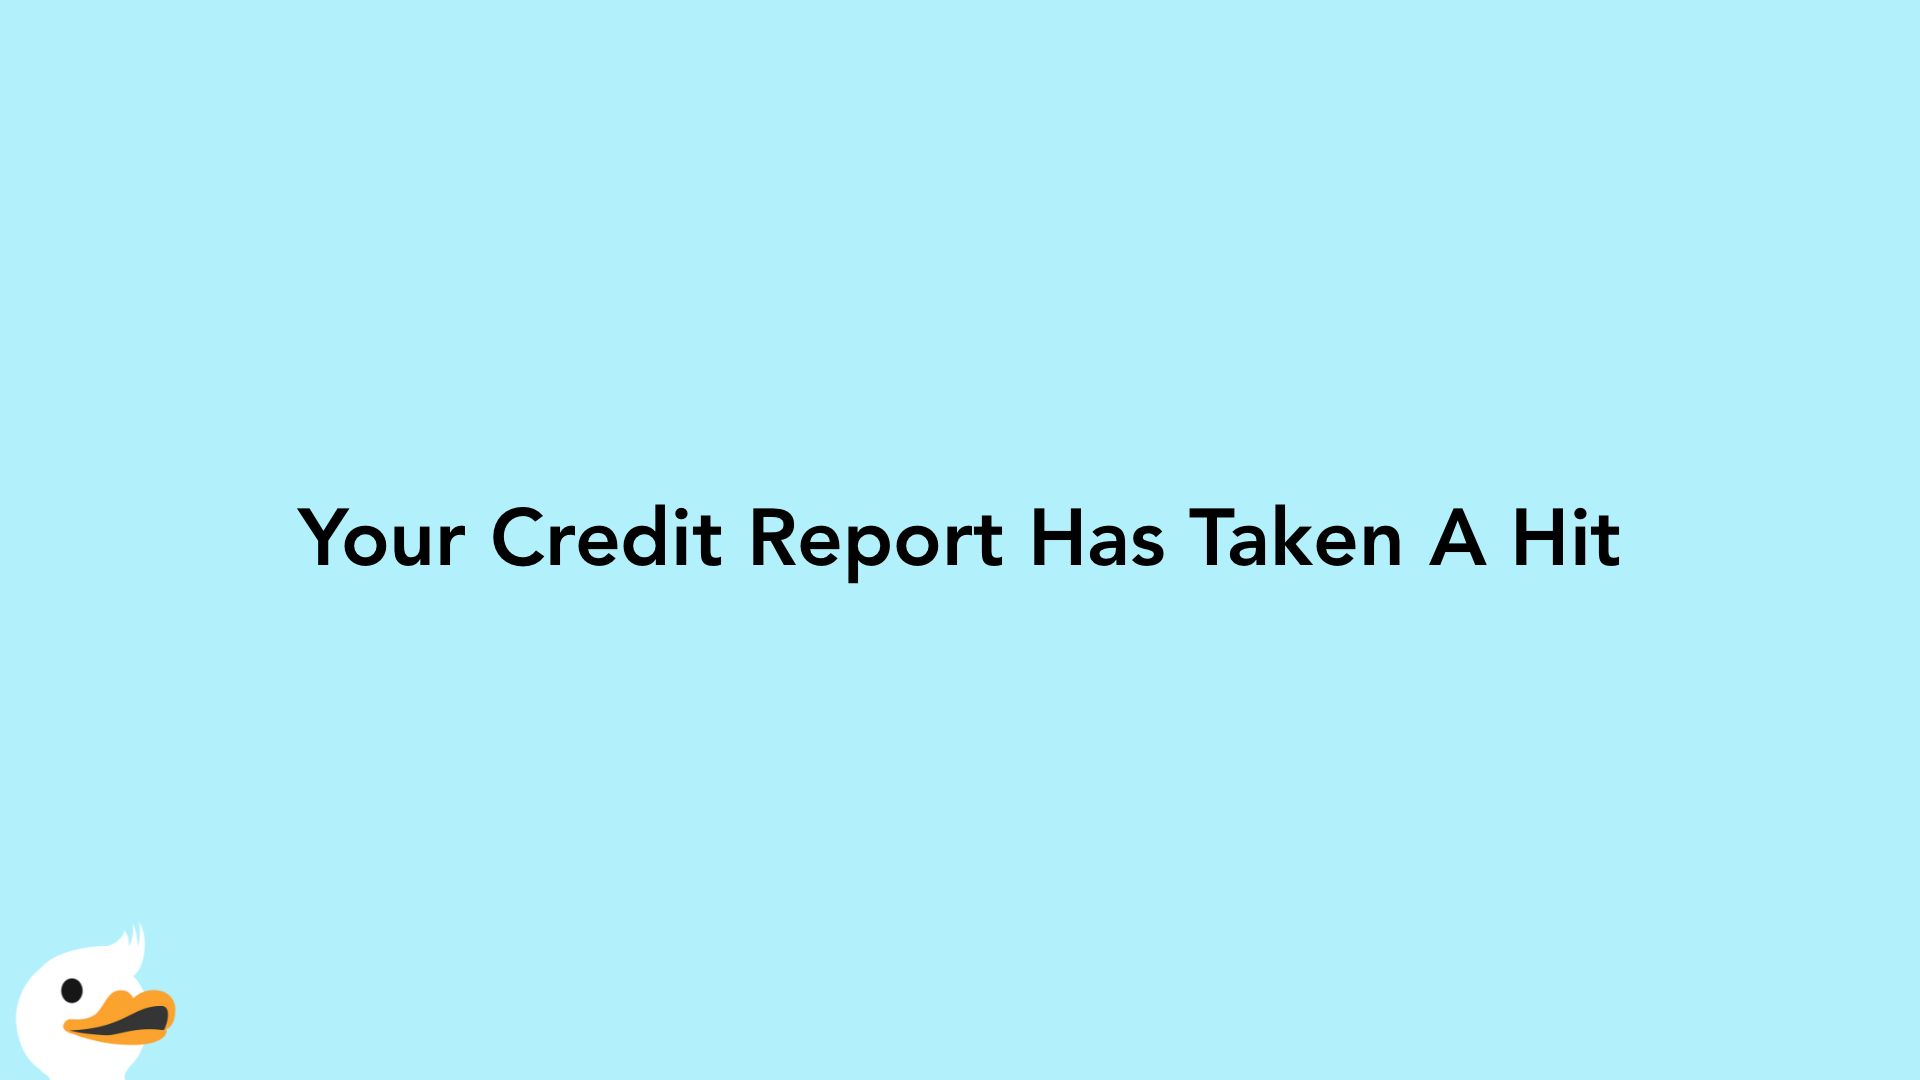 Your Credit Report Has Taken A Hit